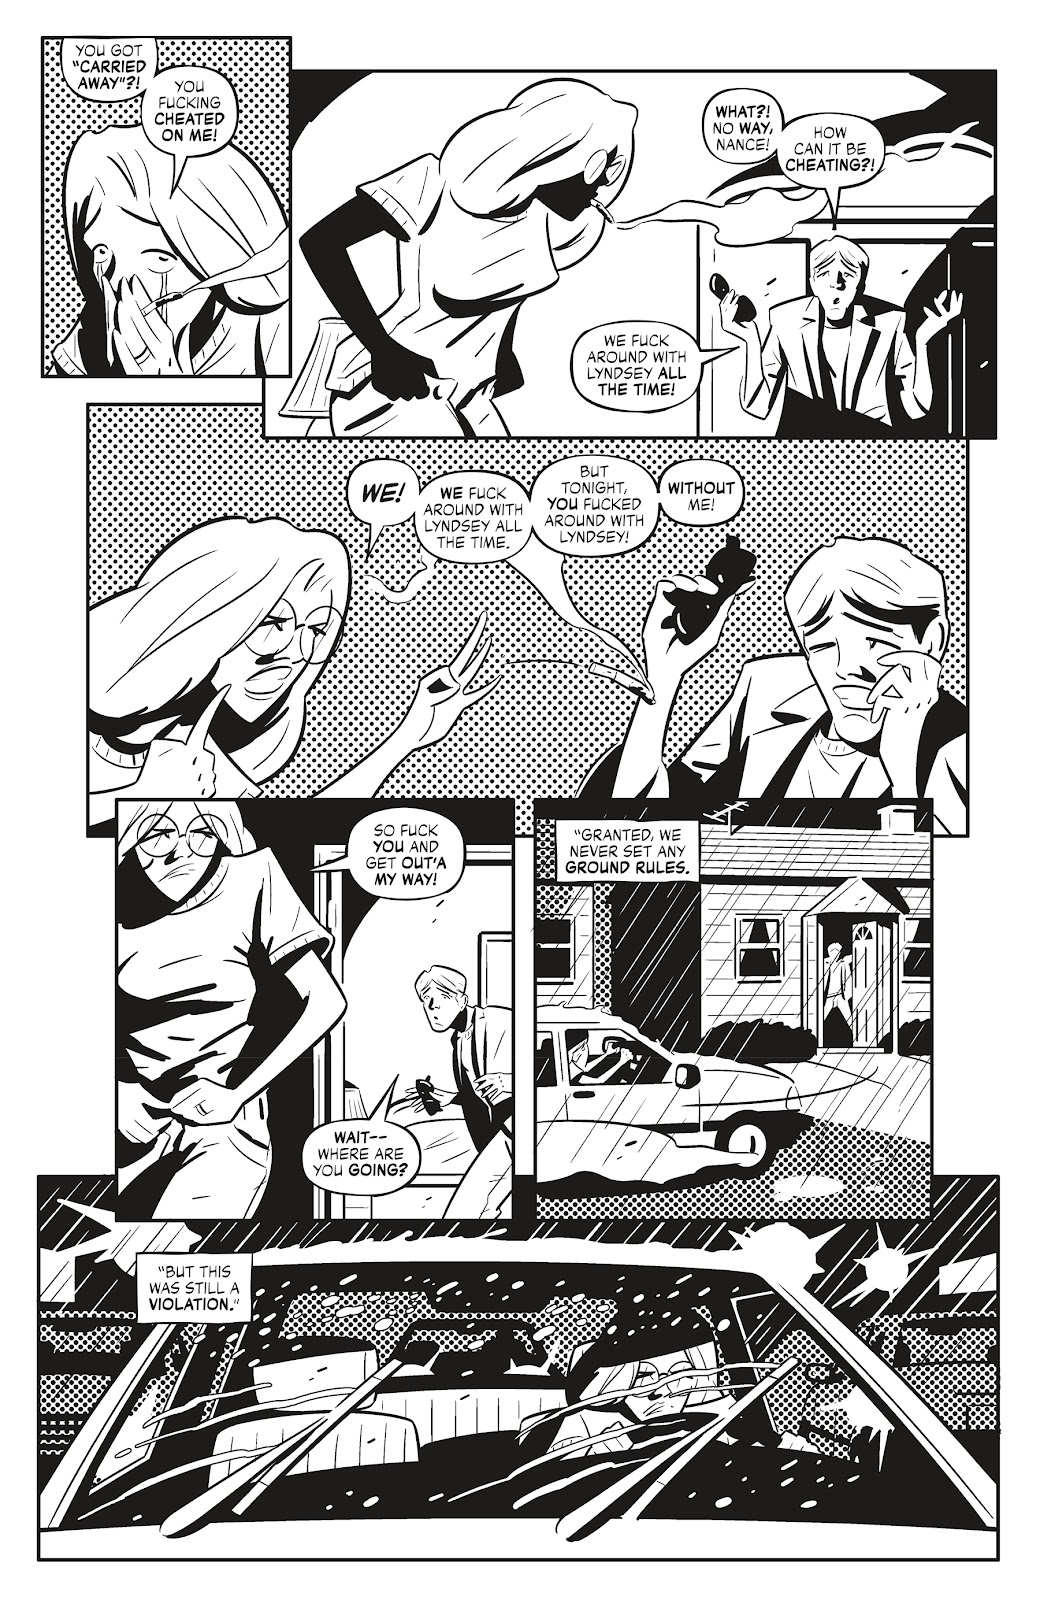 Quick Stops Vol. 2 issue 2 - Page 10